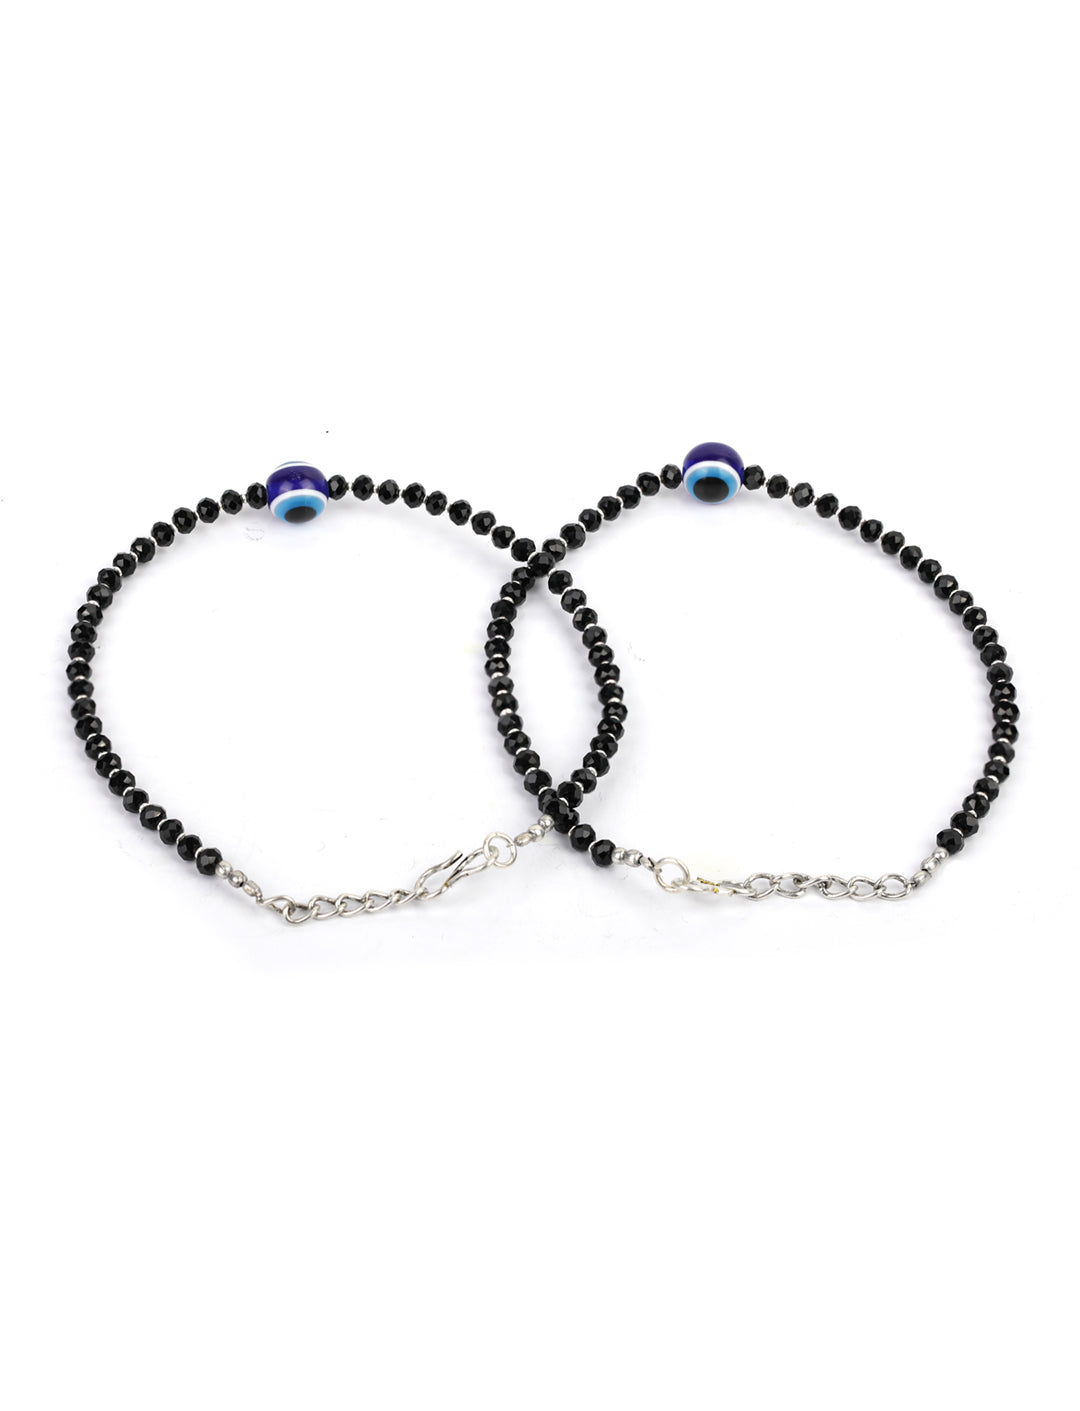 Women's  Black Beads Silver Plated Traditional Anklets - Priyaasi